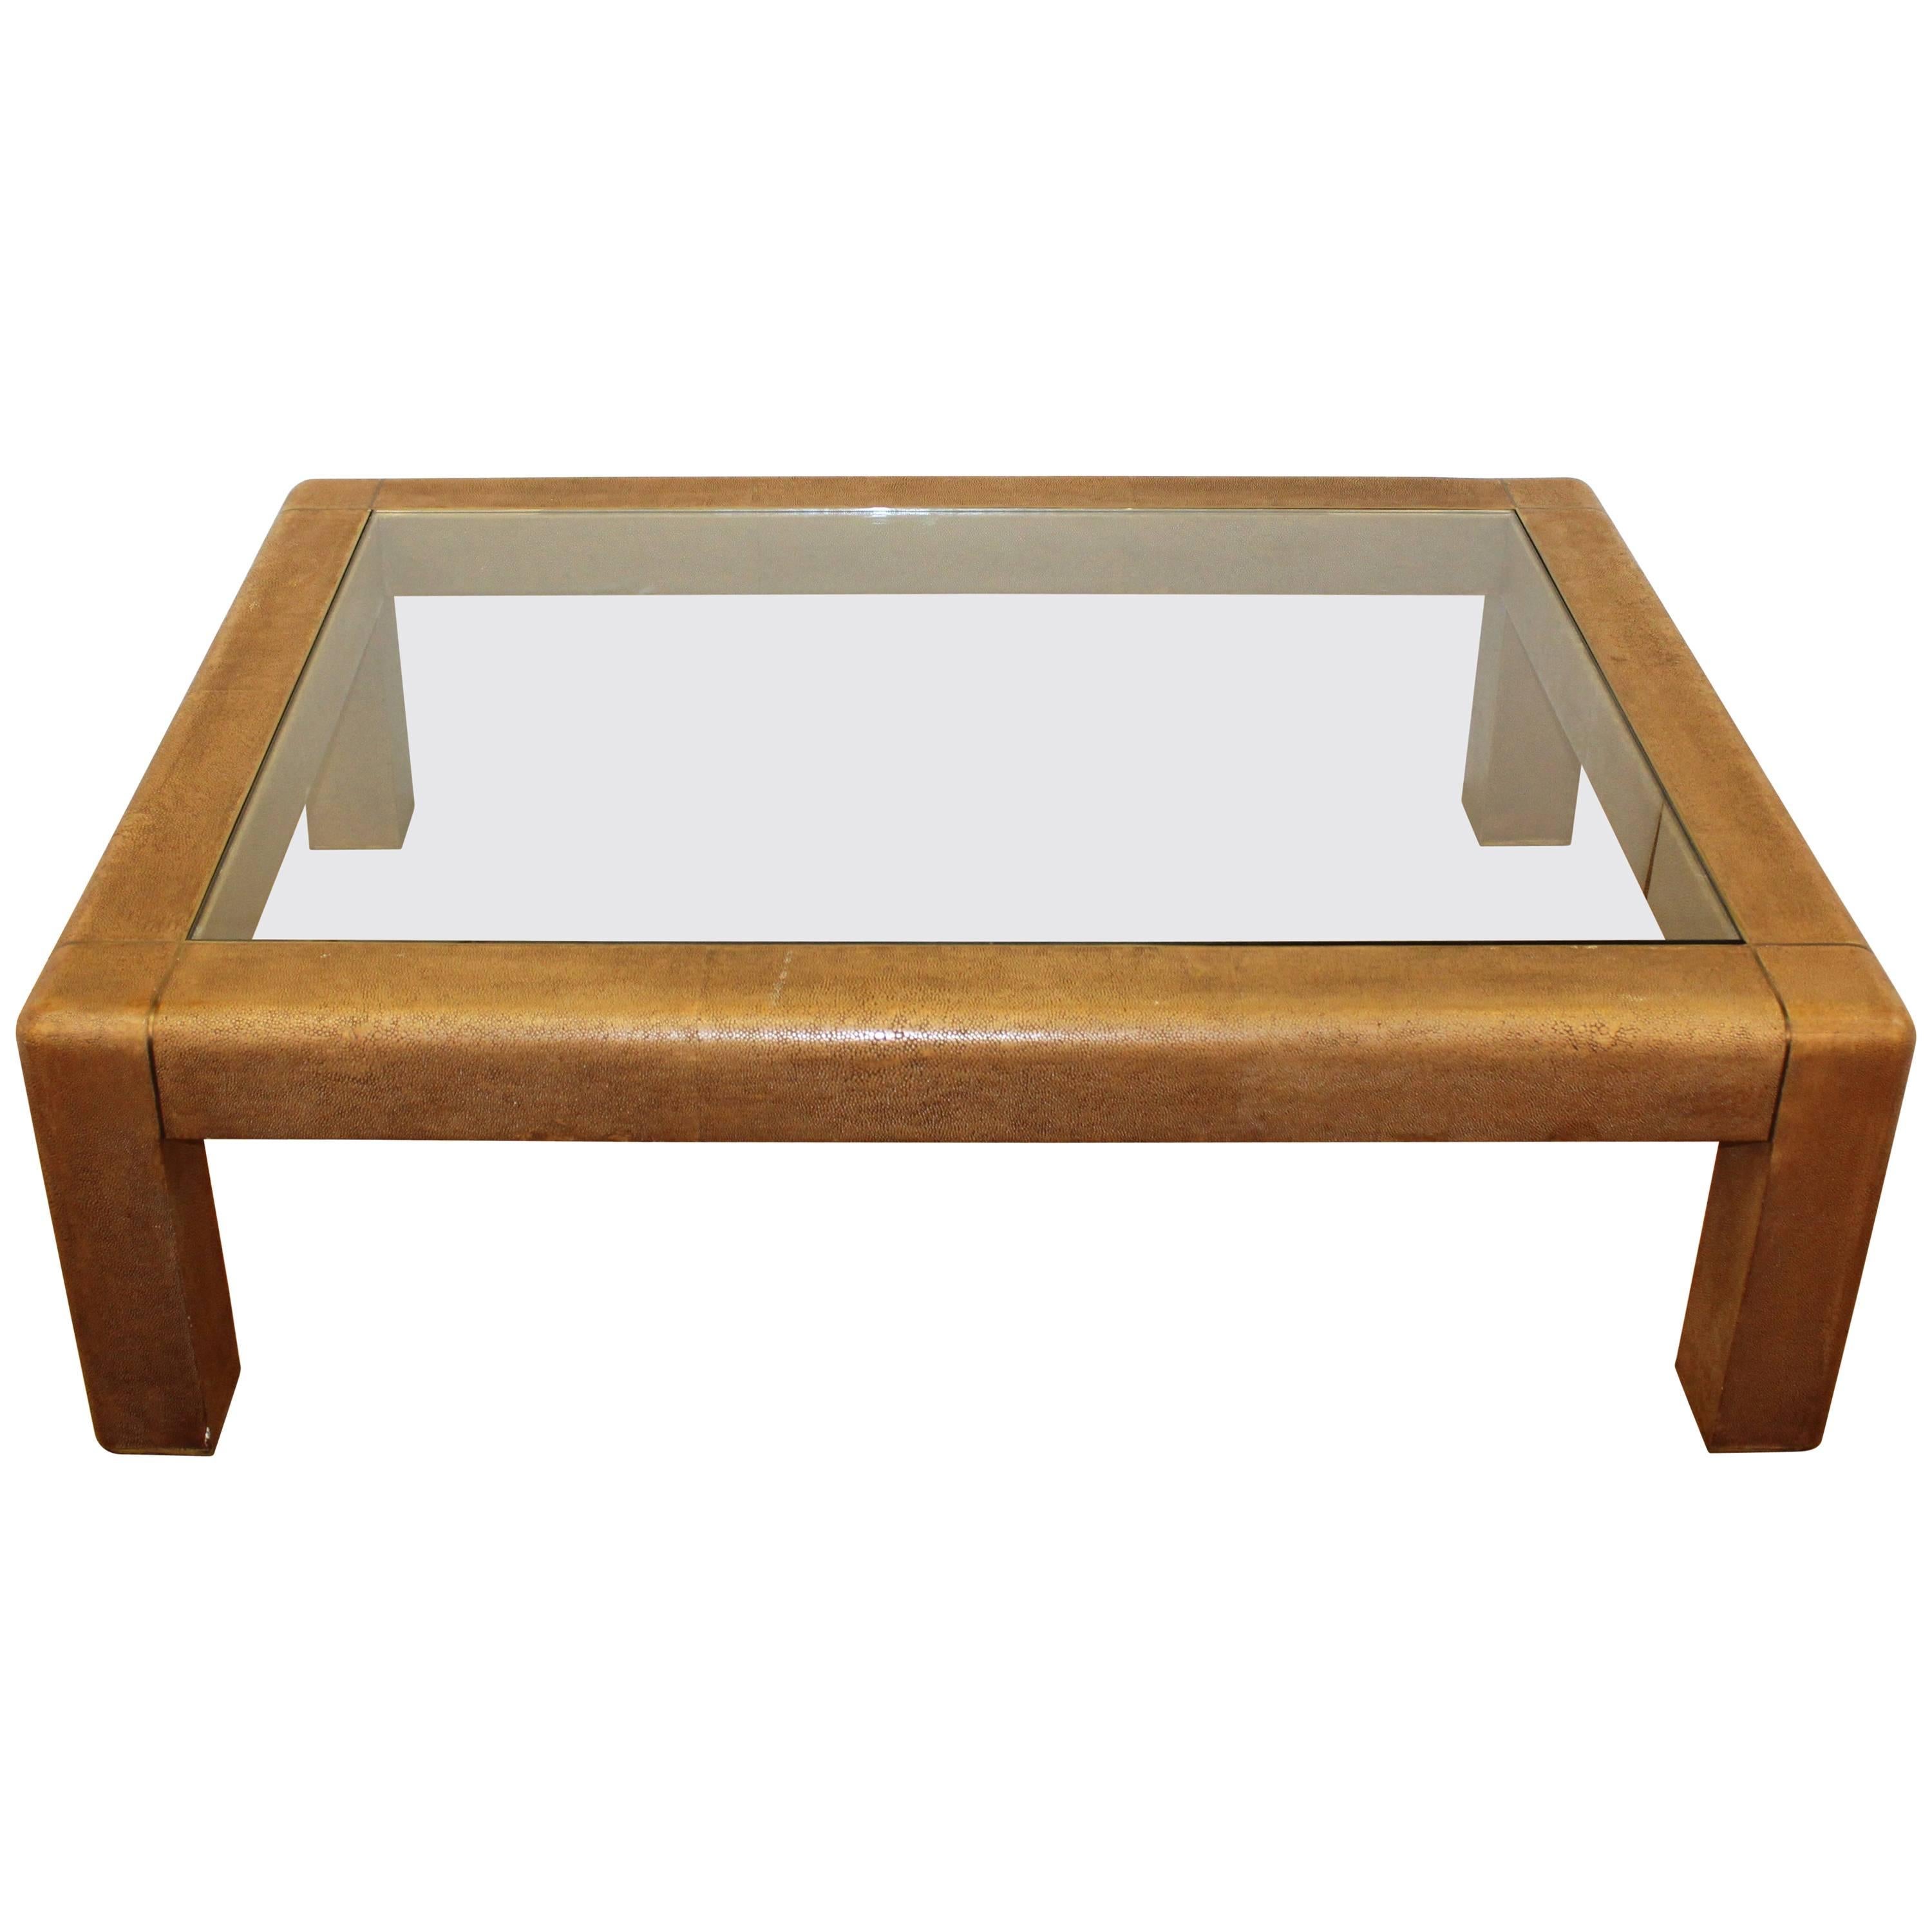 Karl Springer Coffee Table with Brown Shagreen Frame and Inset Glass Panel